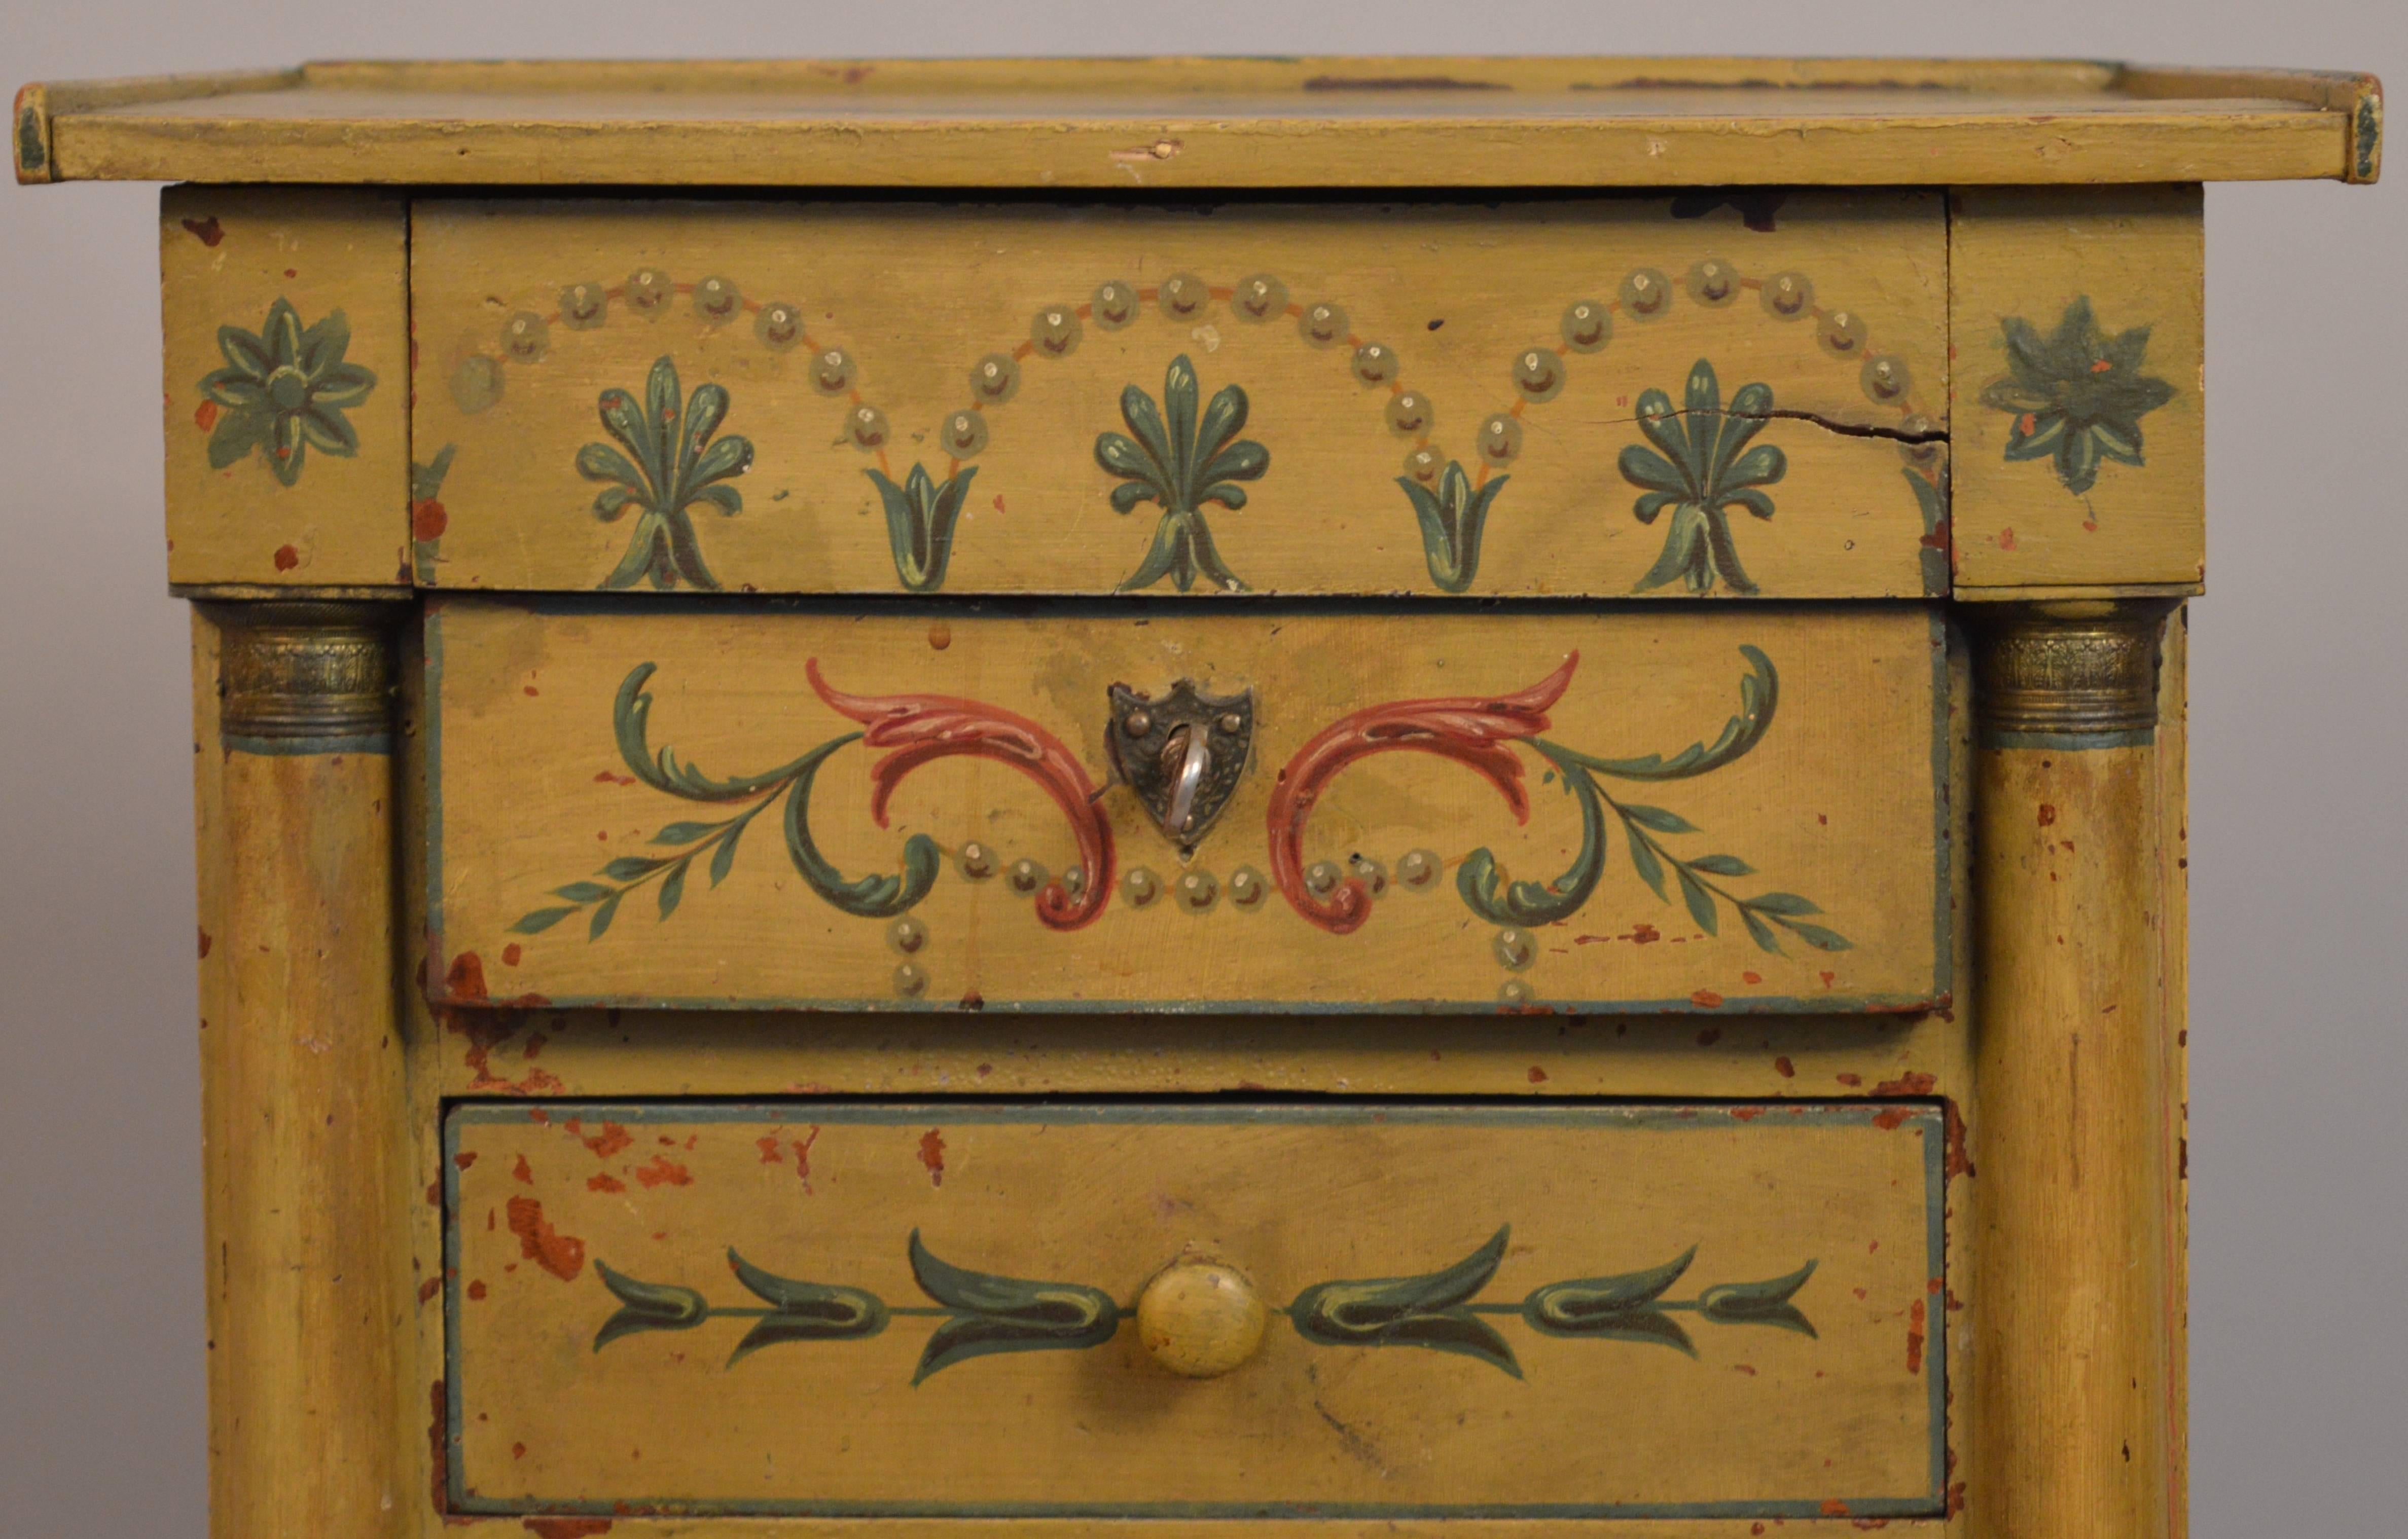 19th Century Empire yellow Austrian painted side table with three-drawers. The classical scenes of angels and trompe l'oeil chains of pearls are superbly painted in the classical color scheme of gold, green, blue and hints of orange.